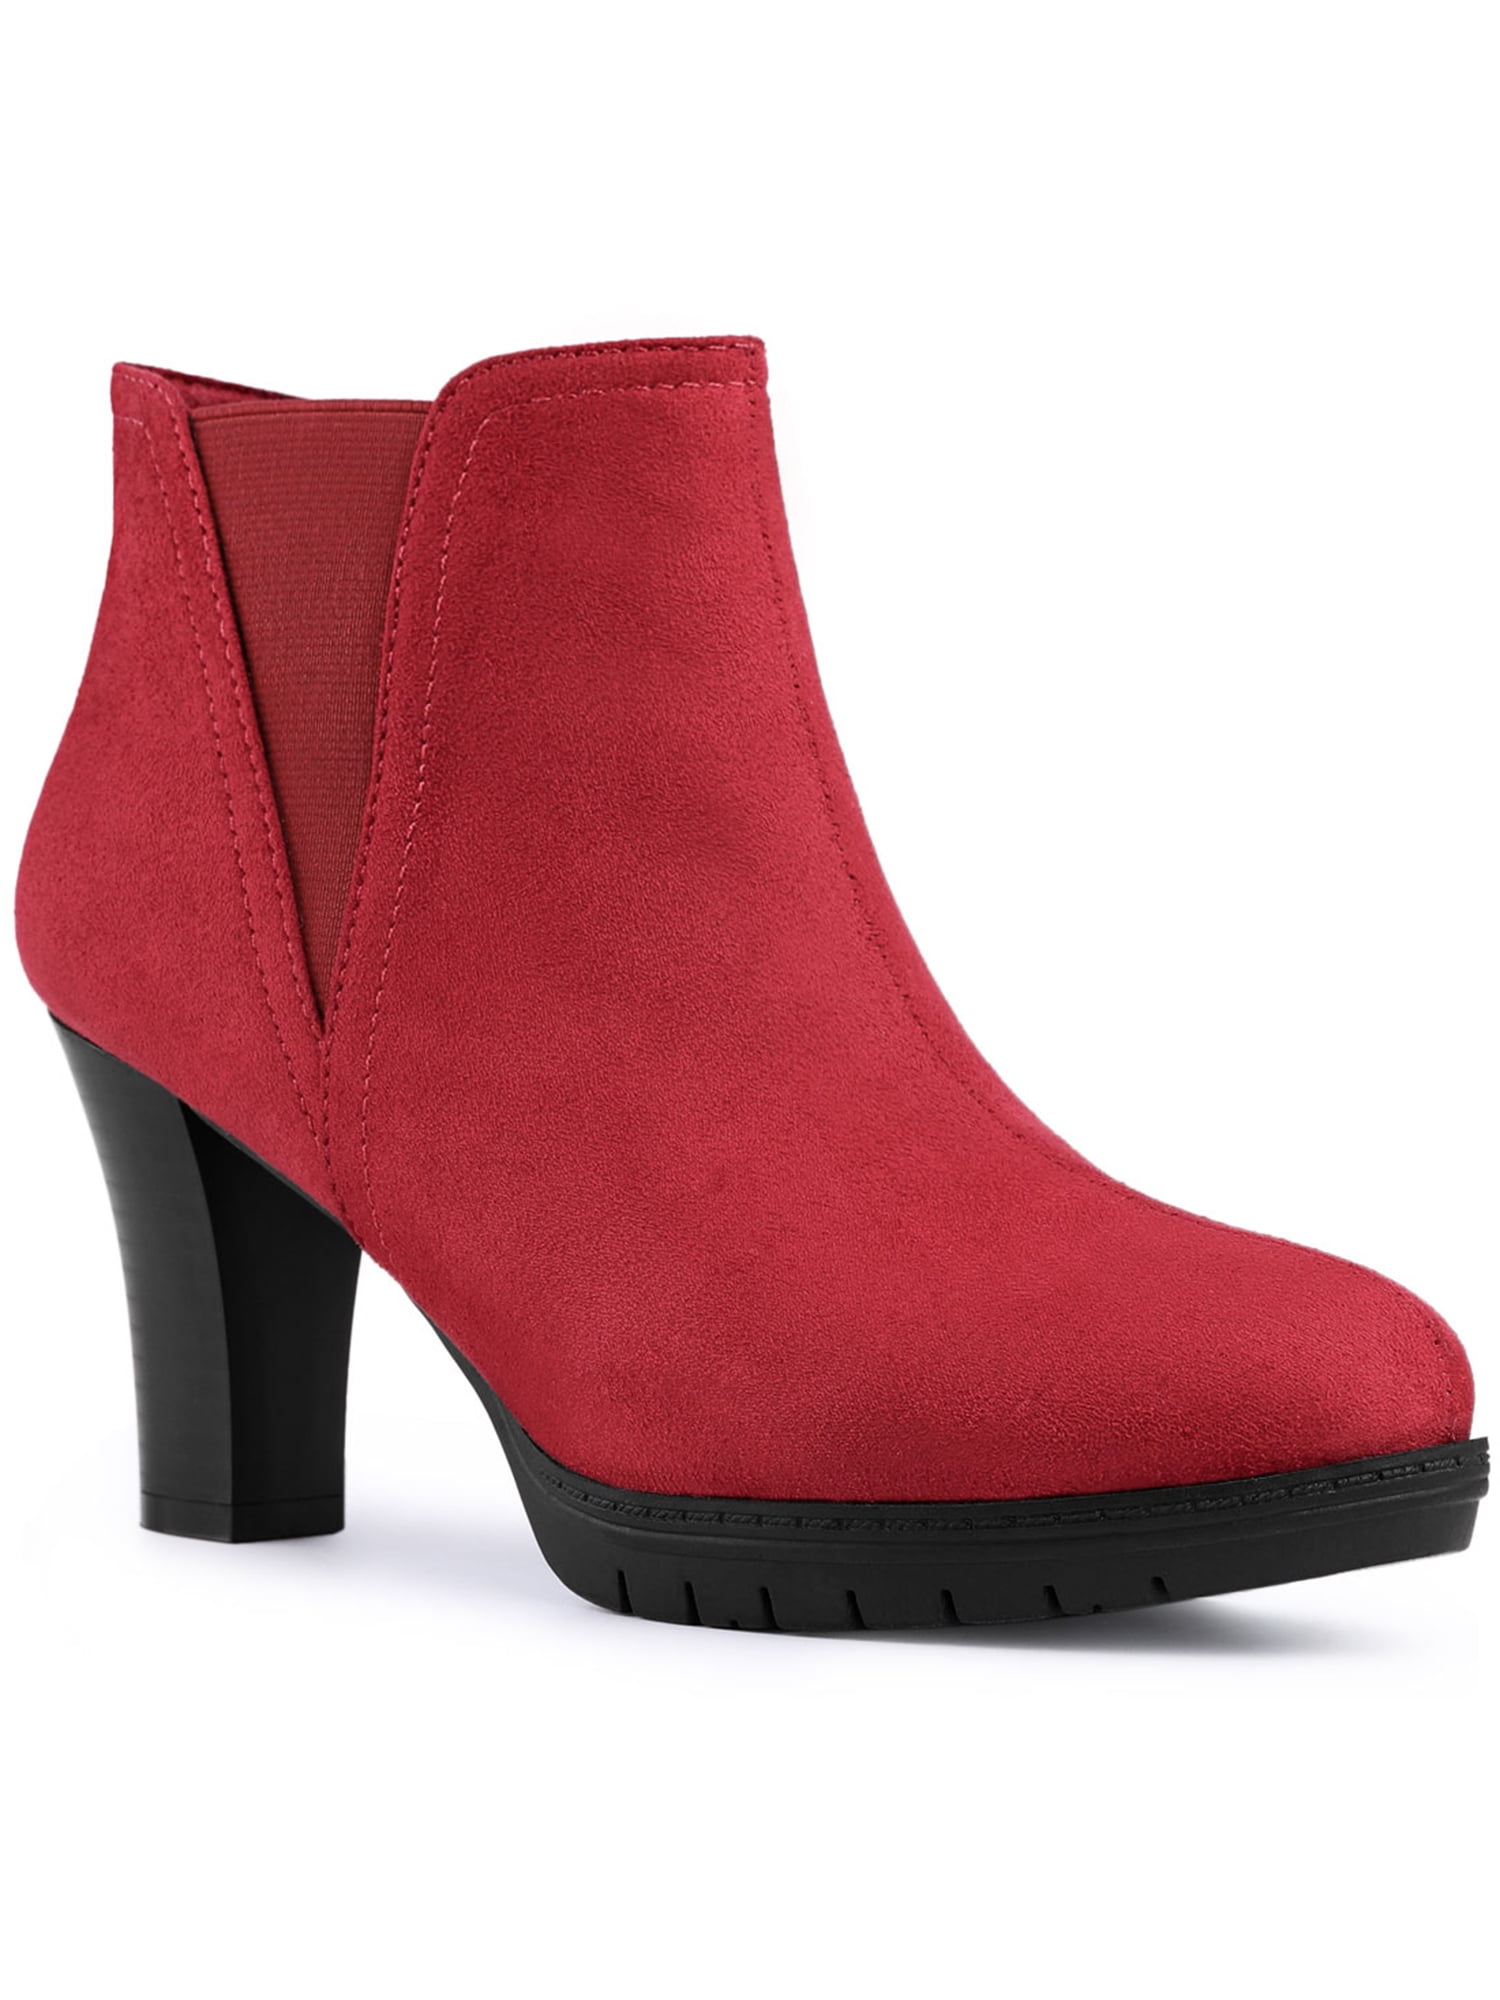 women's round toe ankle boots